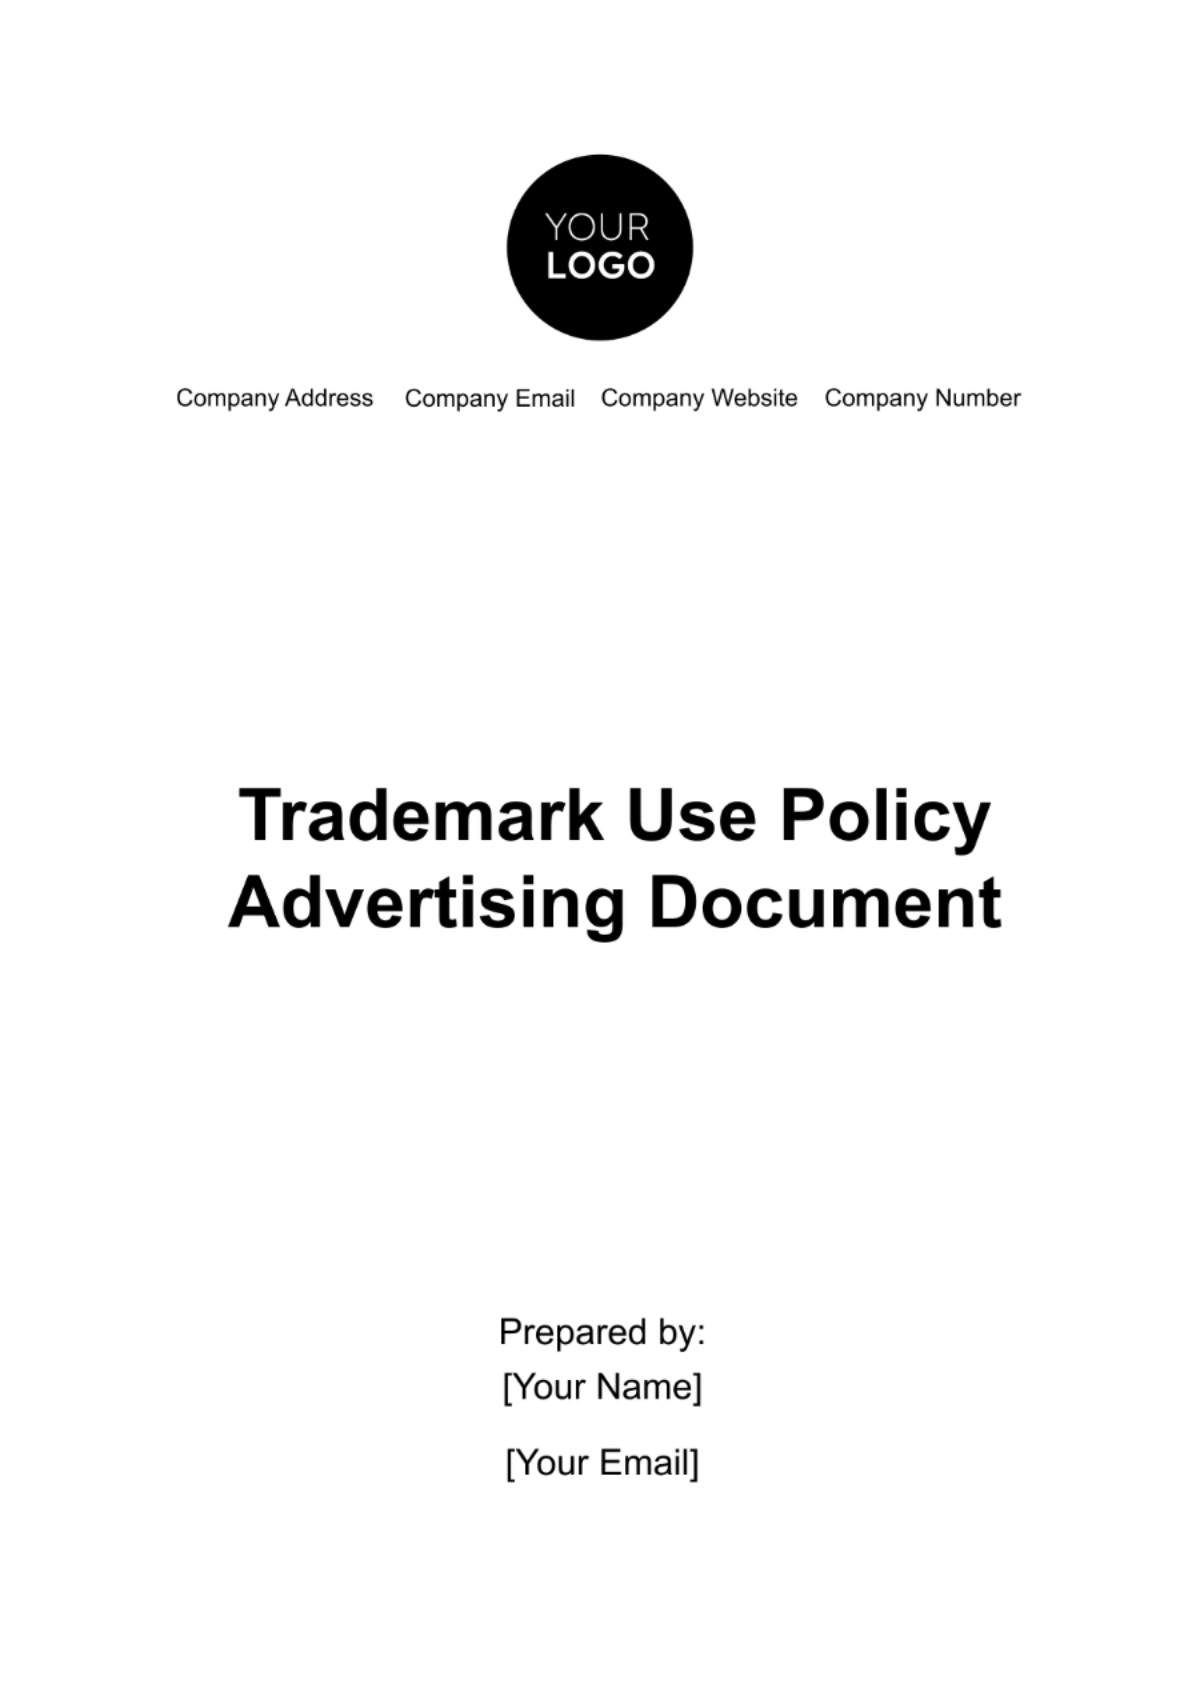 Trademark Use Policy Advertising Document Template